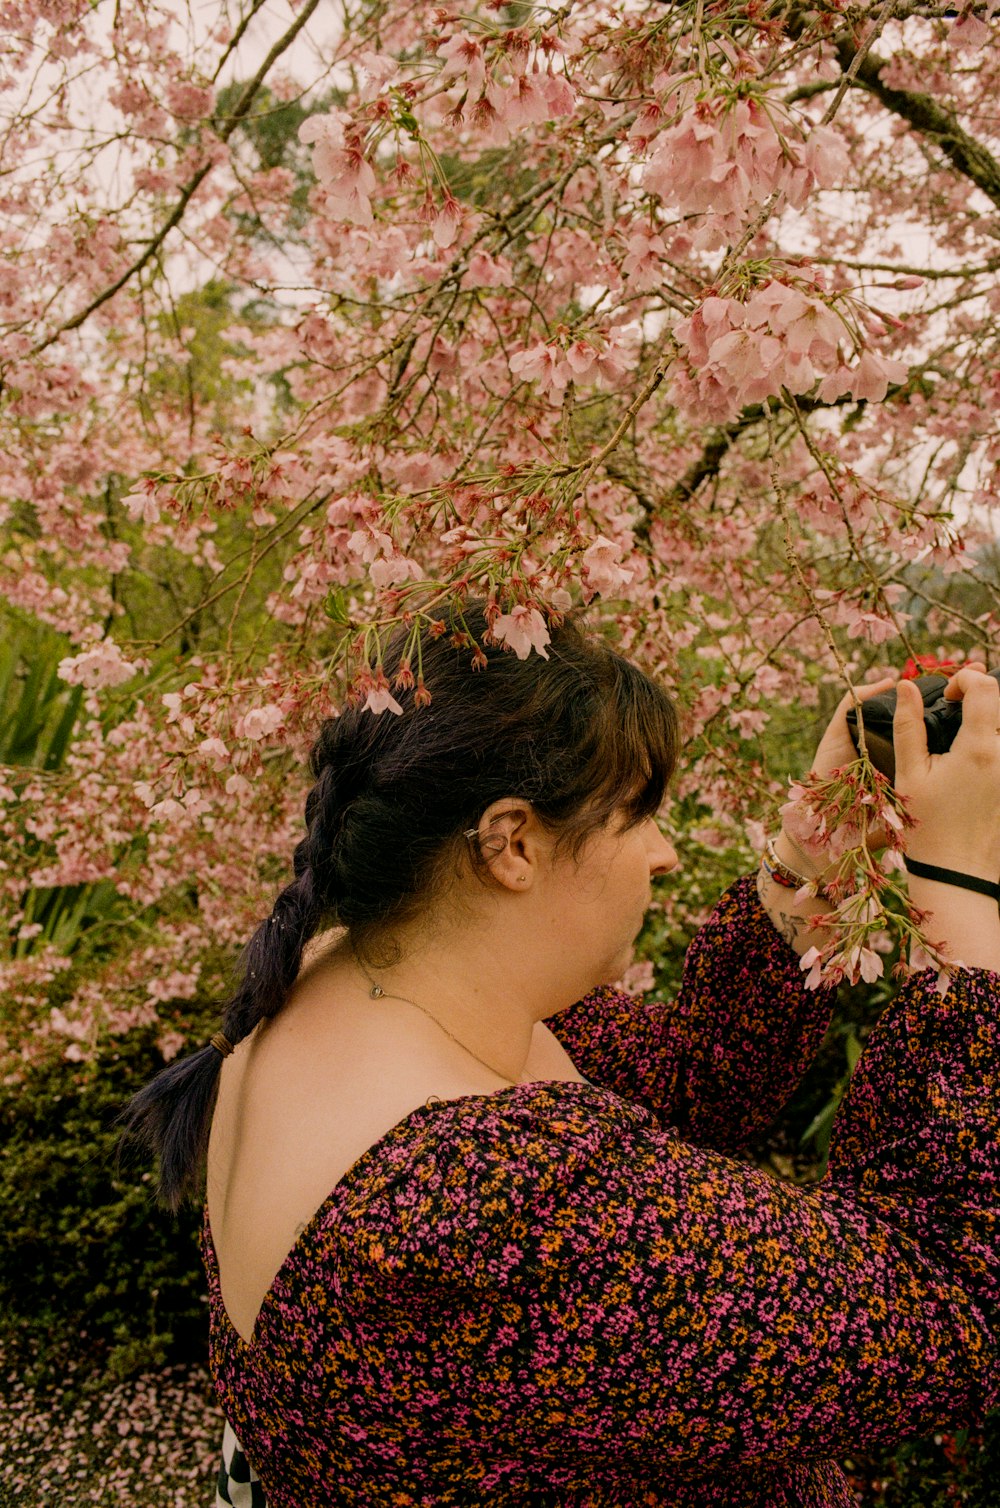 a woman taking a picture of a tree with a camera